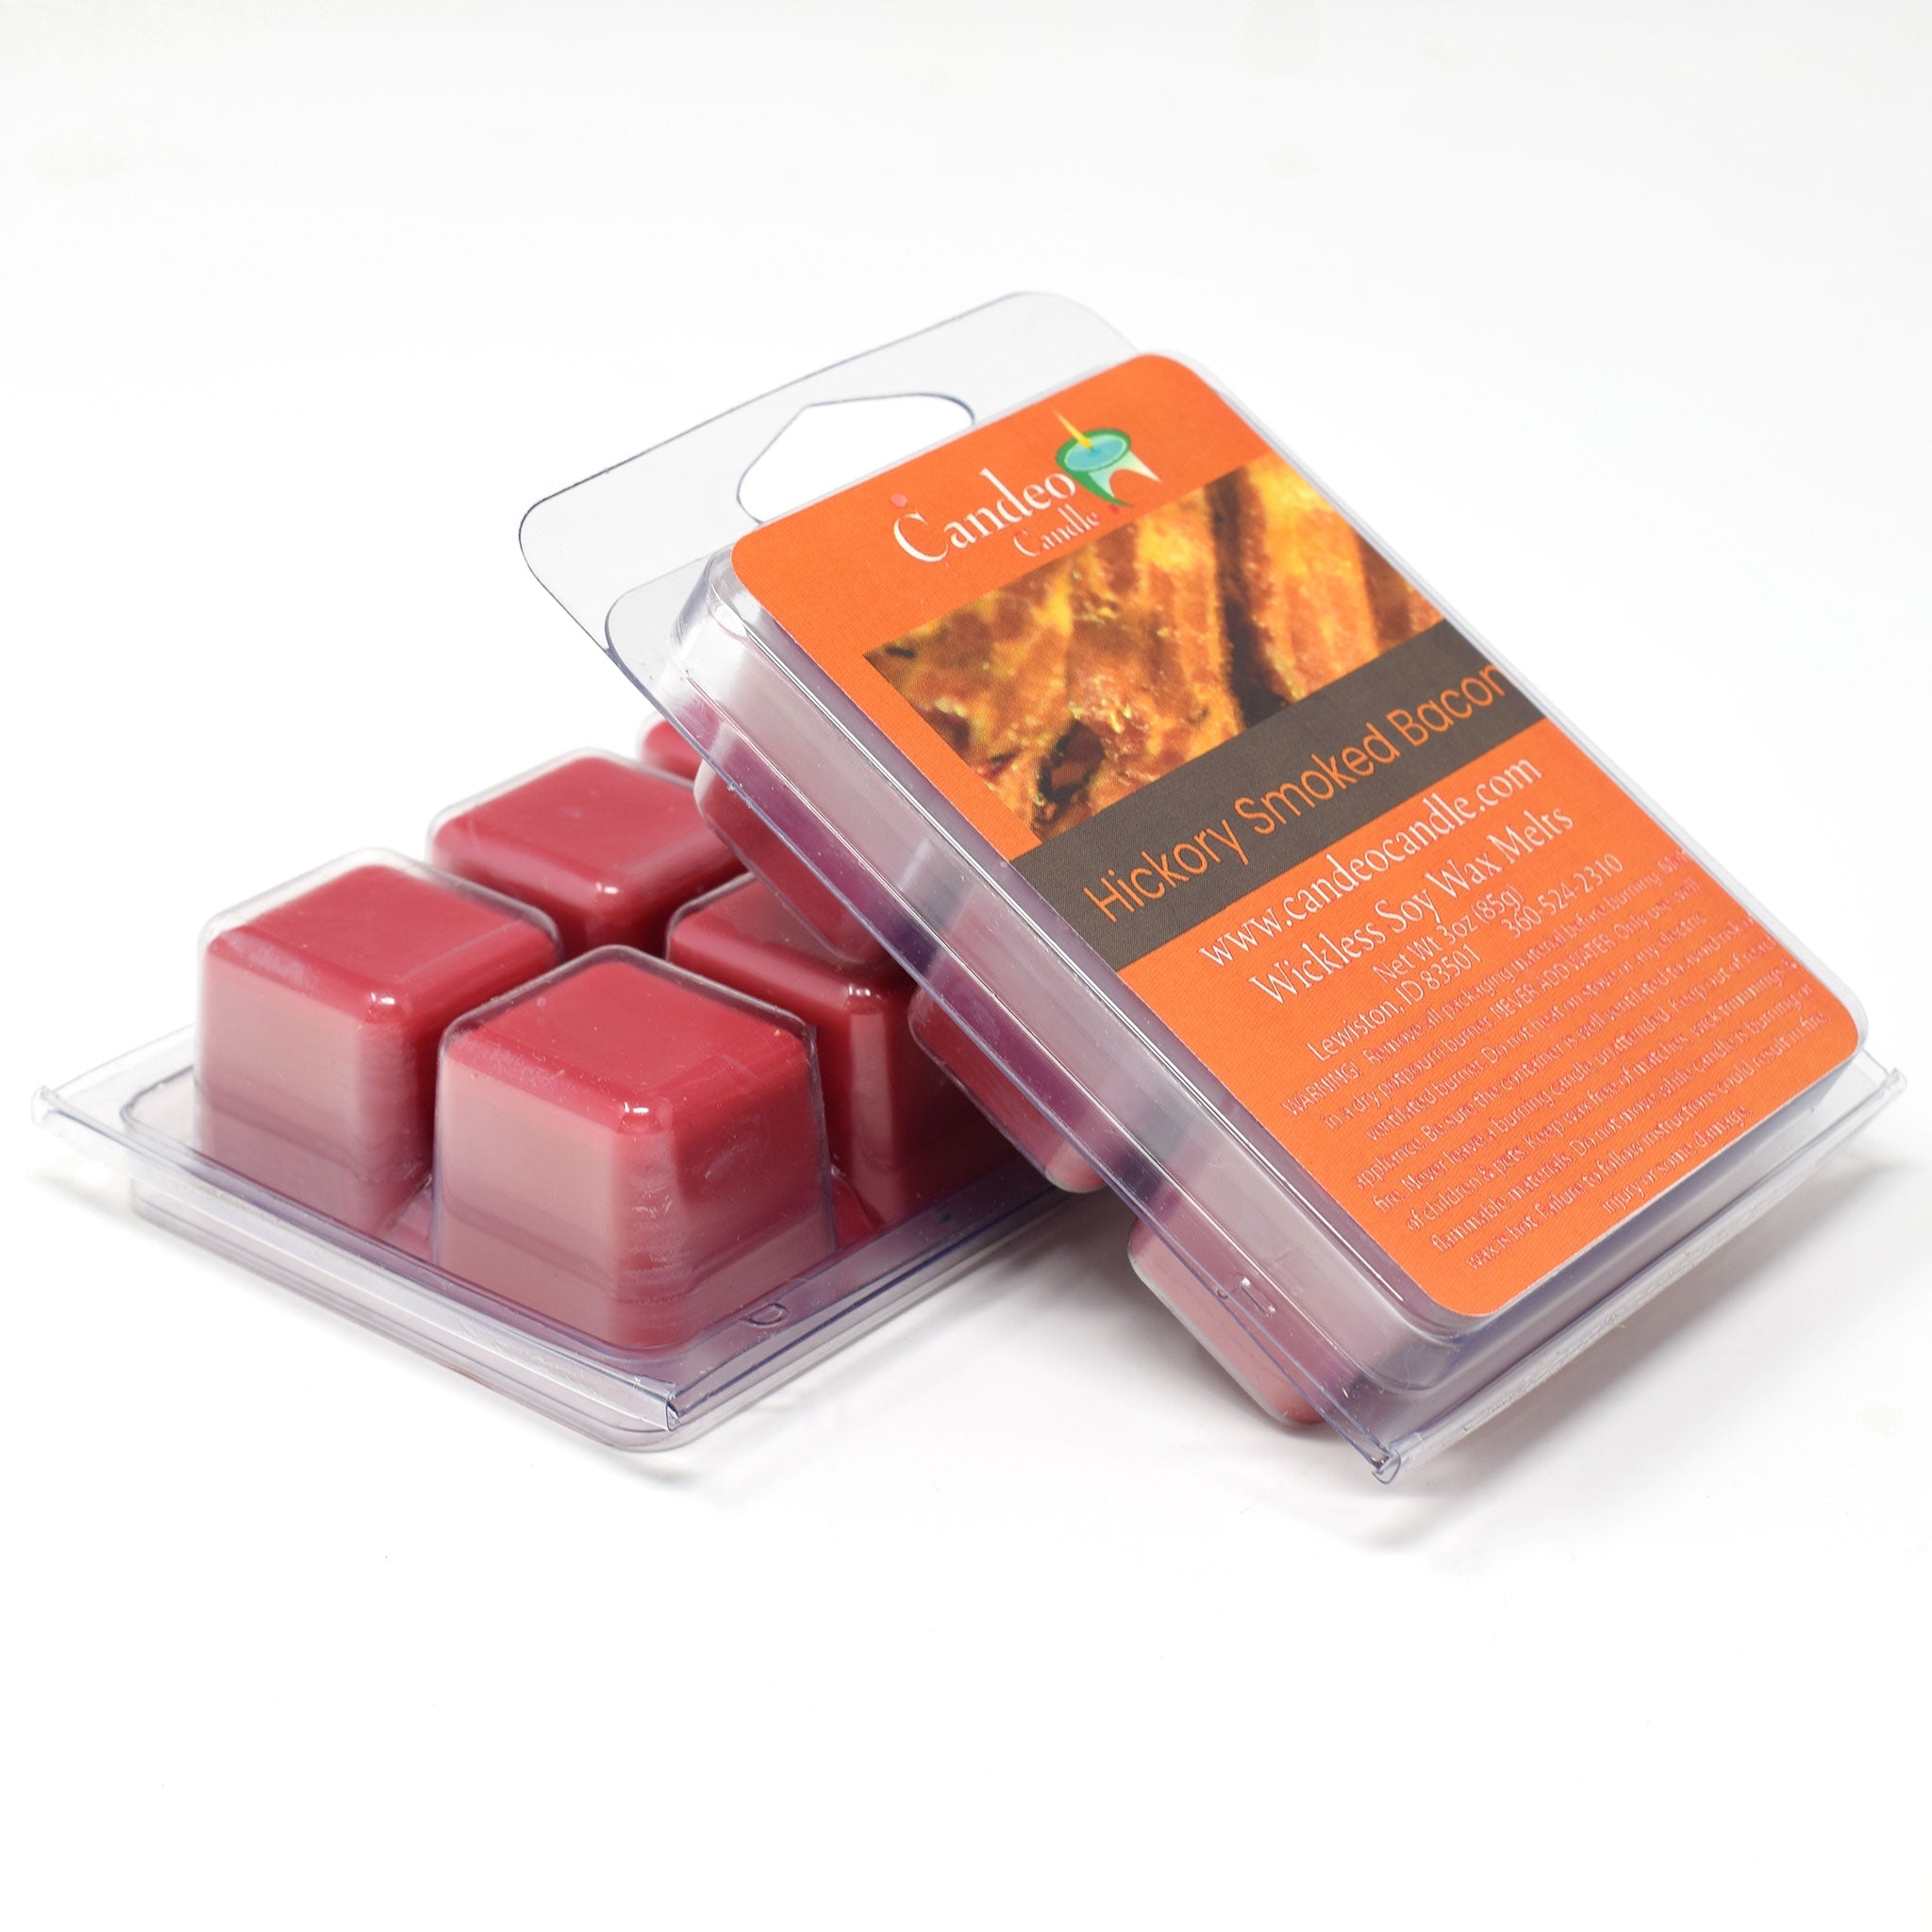 Hickory Smoked Bacon, Soy Melt Cubes, 2-Pack - Candeo Candle